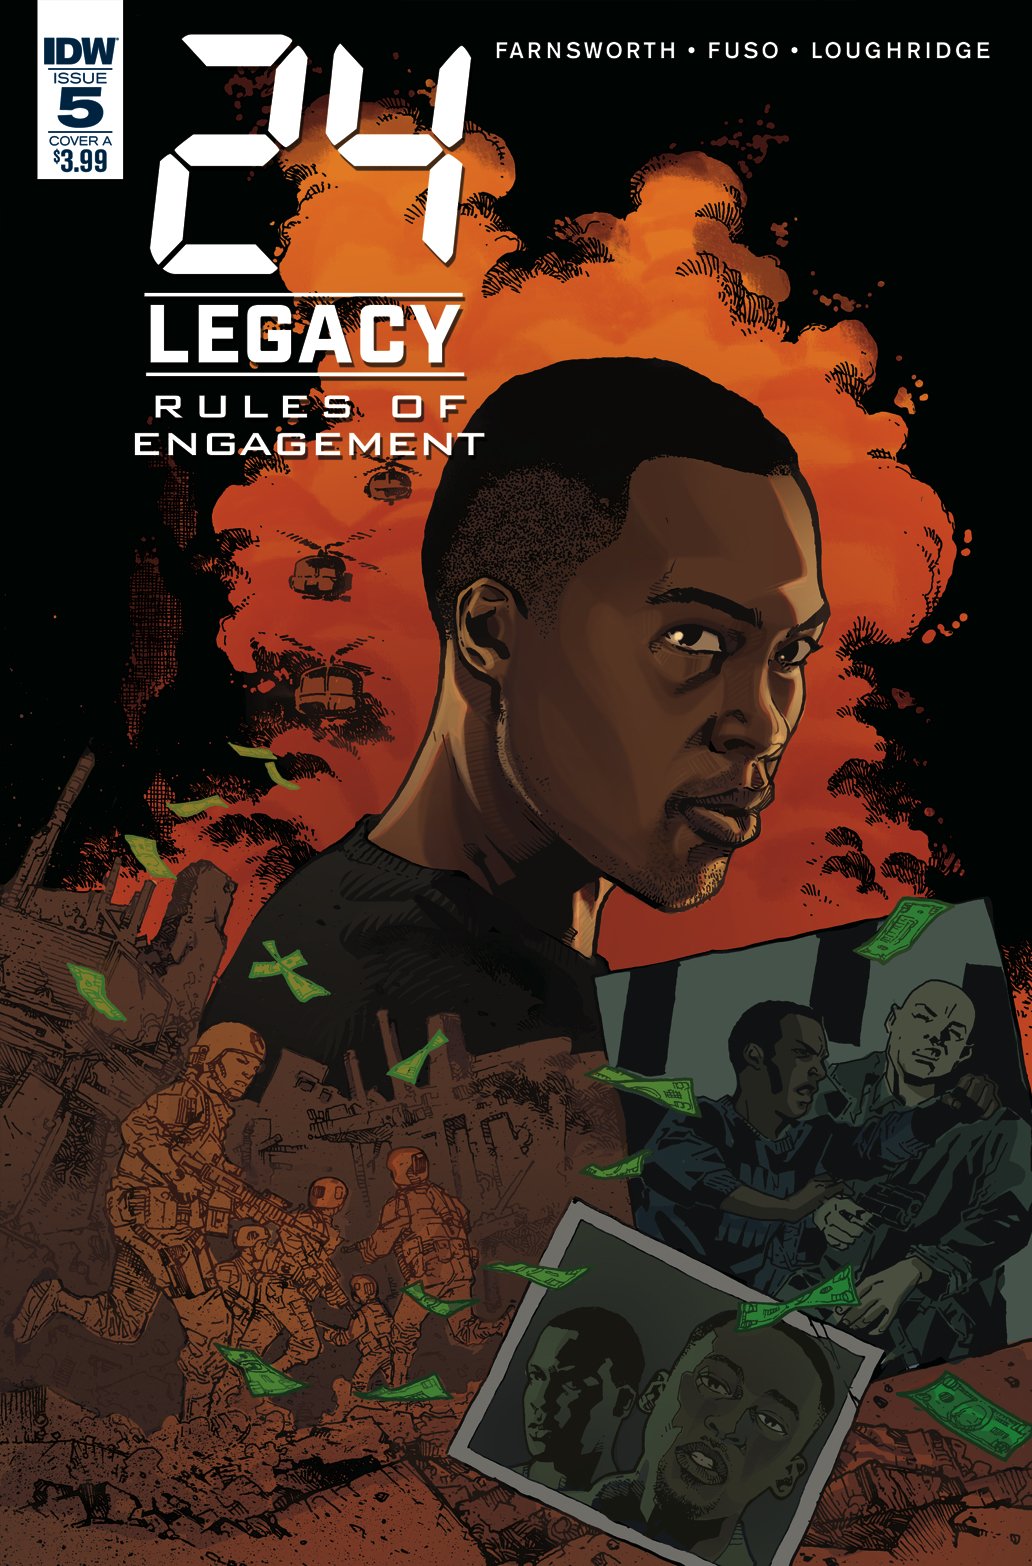 24 LEGACY RULES OF ENGAGEMENT #5 (OF 5) CVR A JEANTY COVER